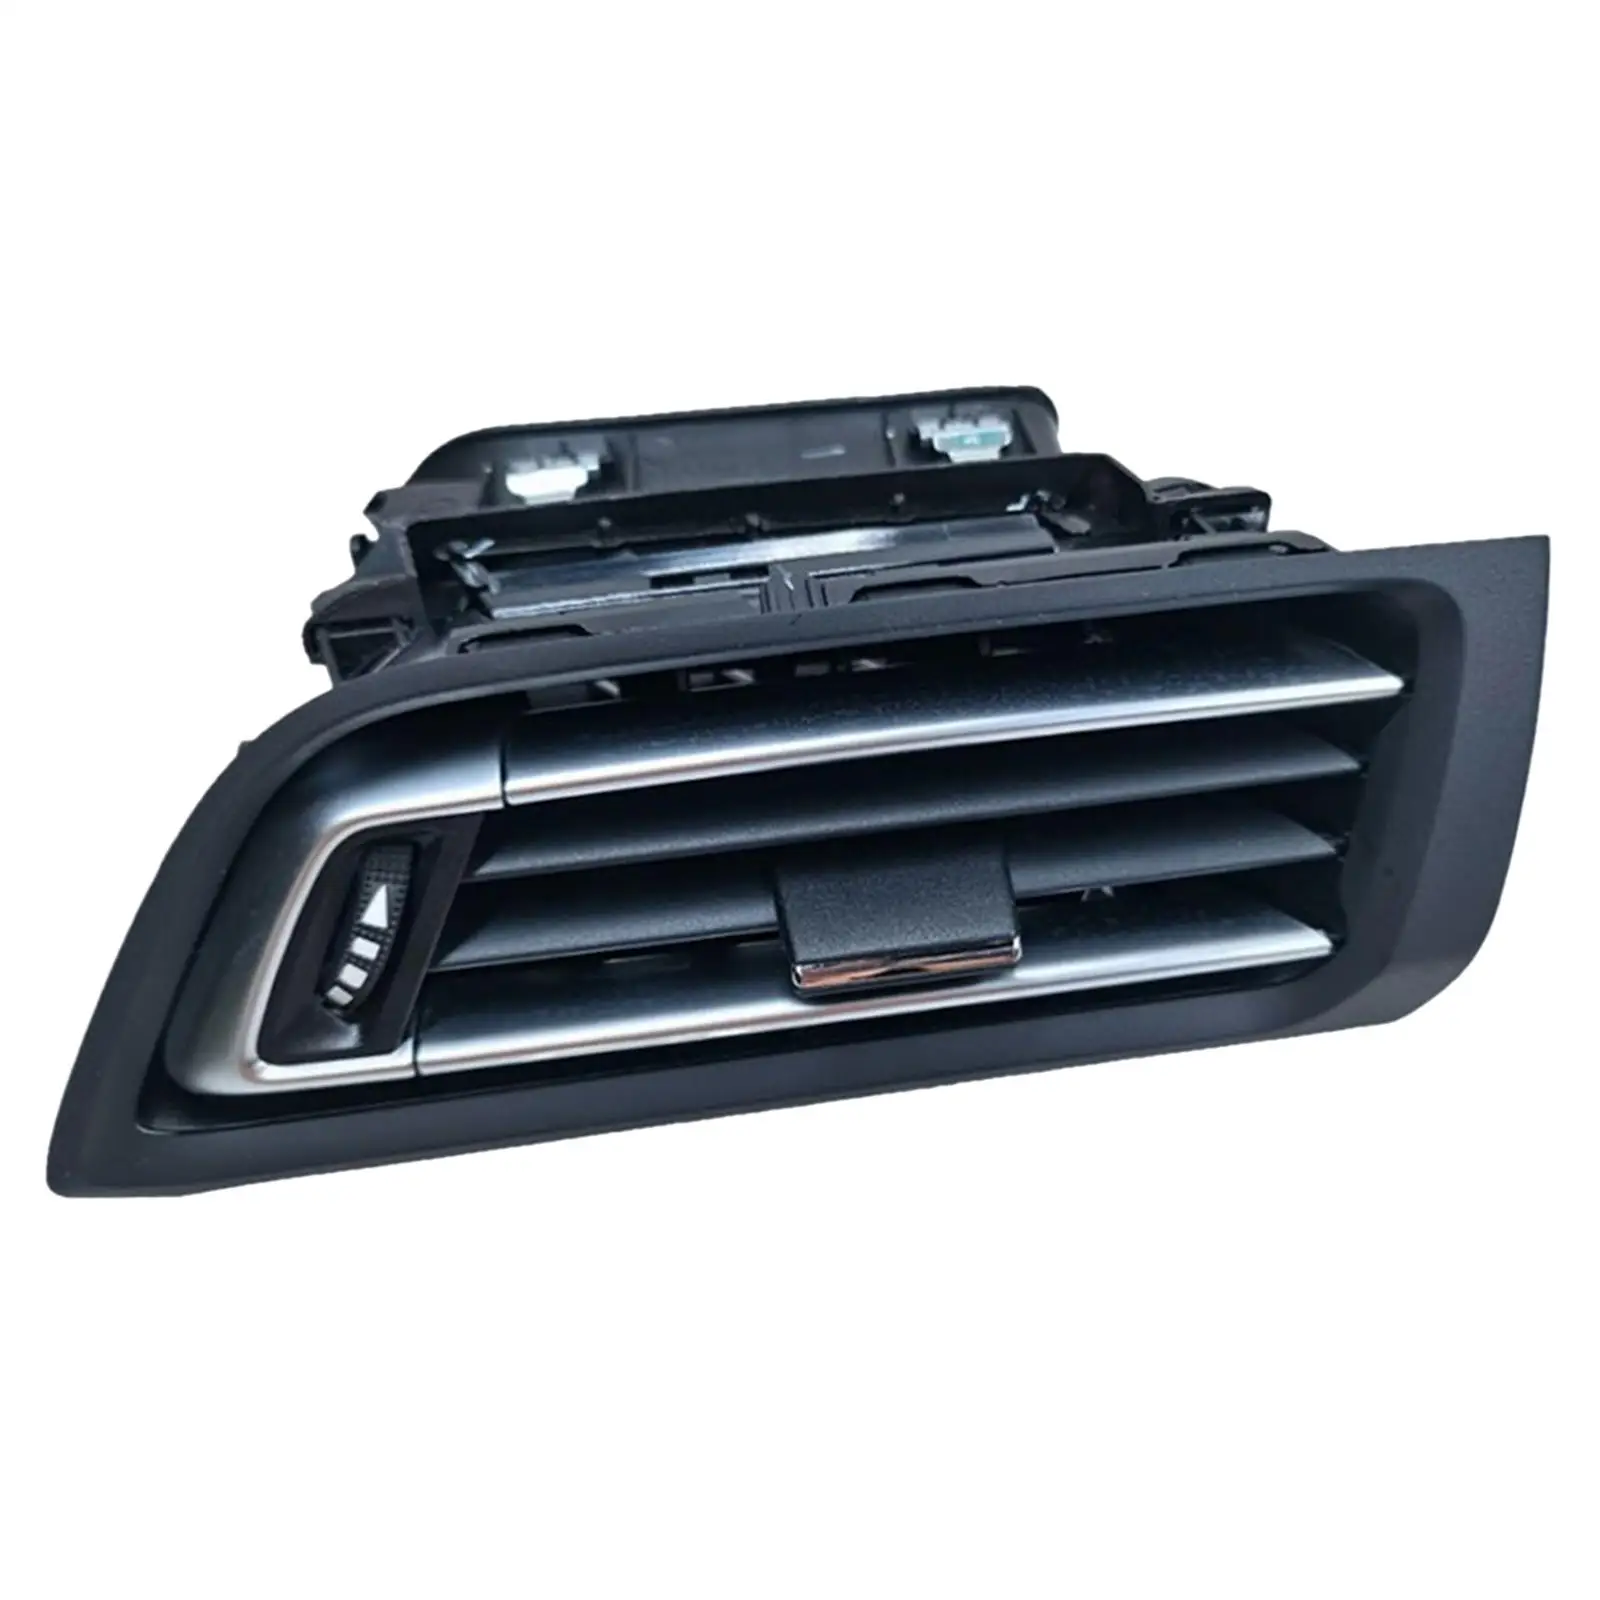 Auto Dashboard   Vent Wear Resistant Repl es Easy Installation 96782701ZD Ventilation Outlet for Peugeot 308 Parts Repair